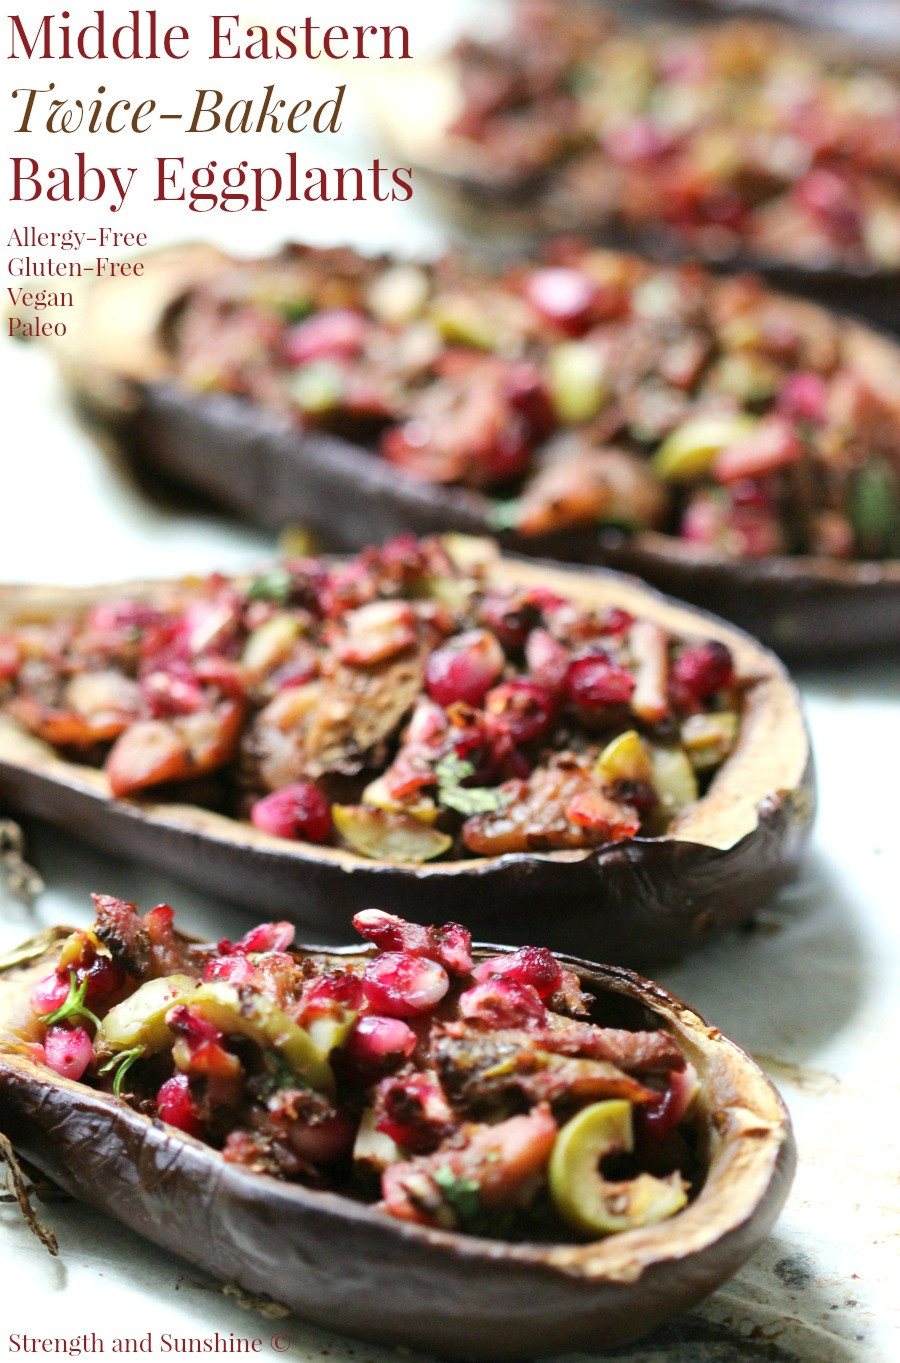 Middle Eastern Vegan Recipes
 Middle Eastern Twice Baked Baby Eggplants